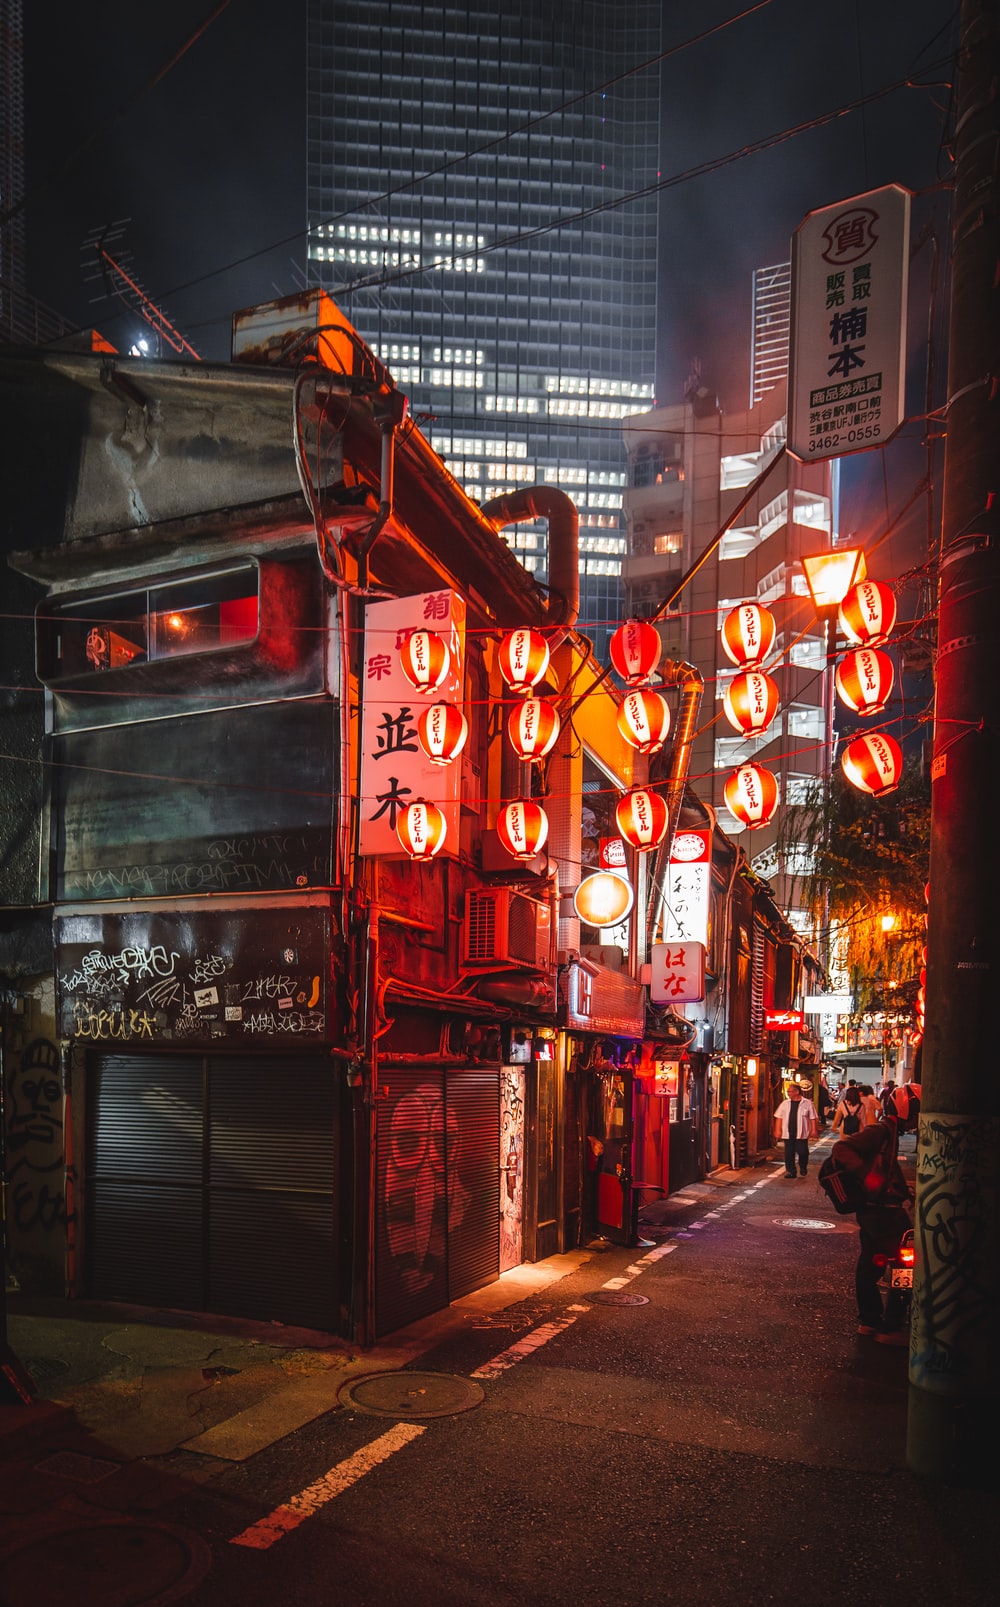 Tokyo Street Picture. Download Free Image